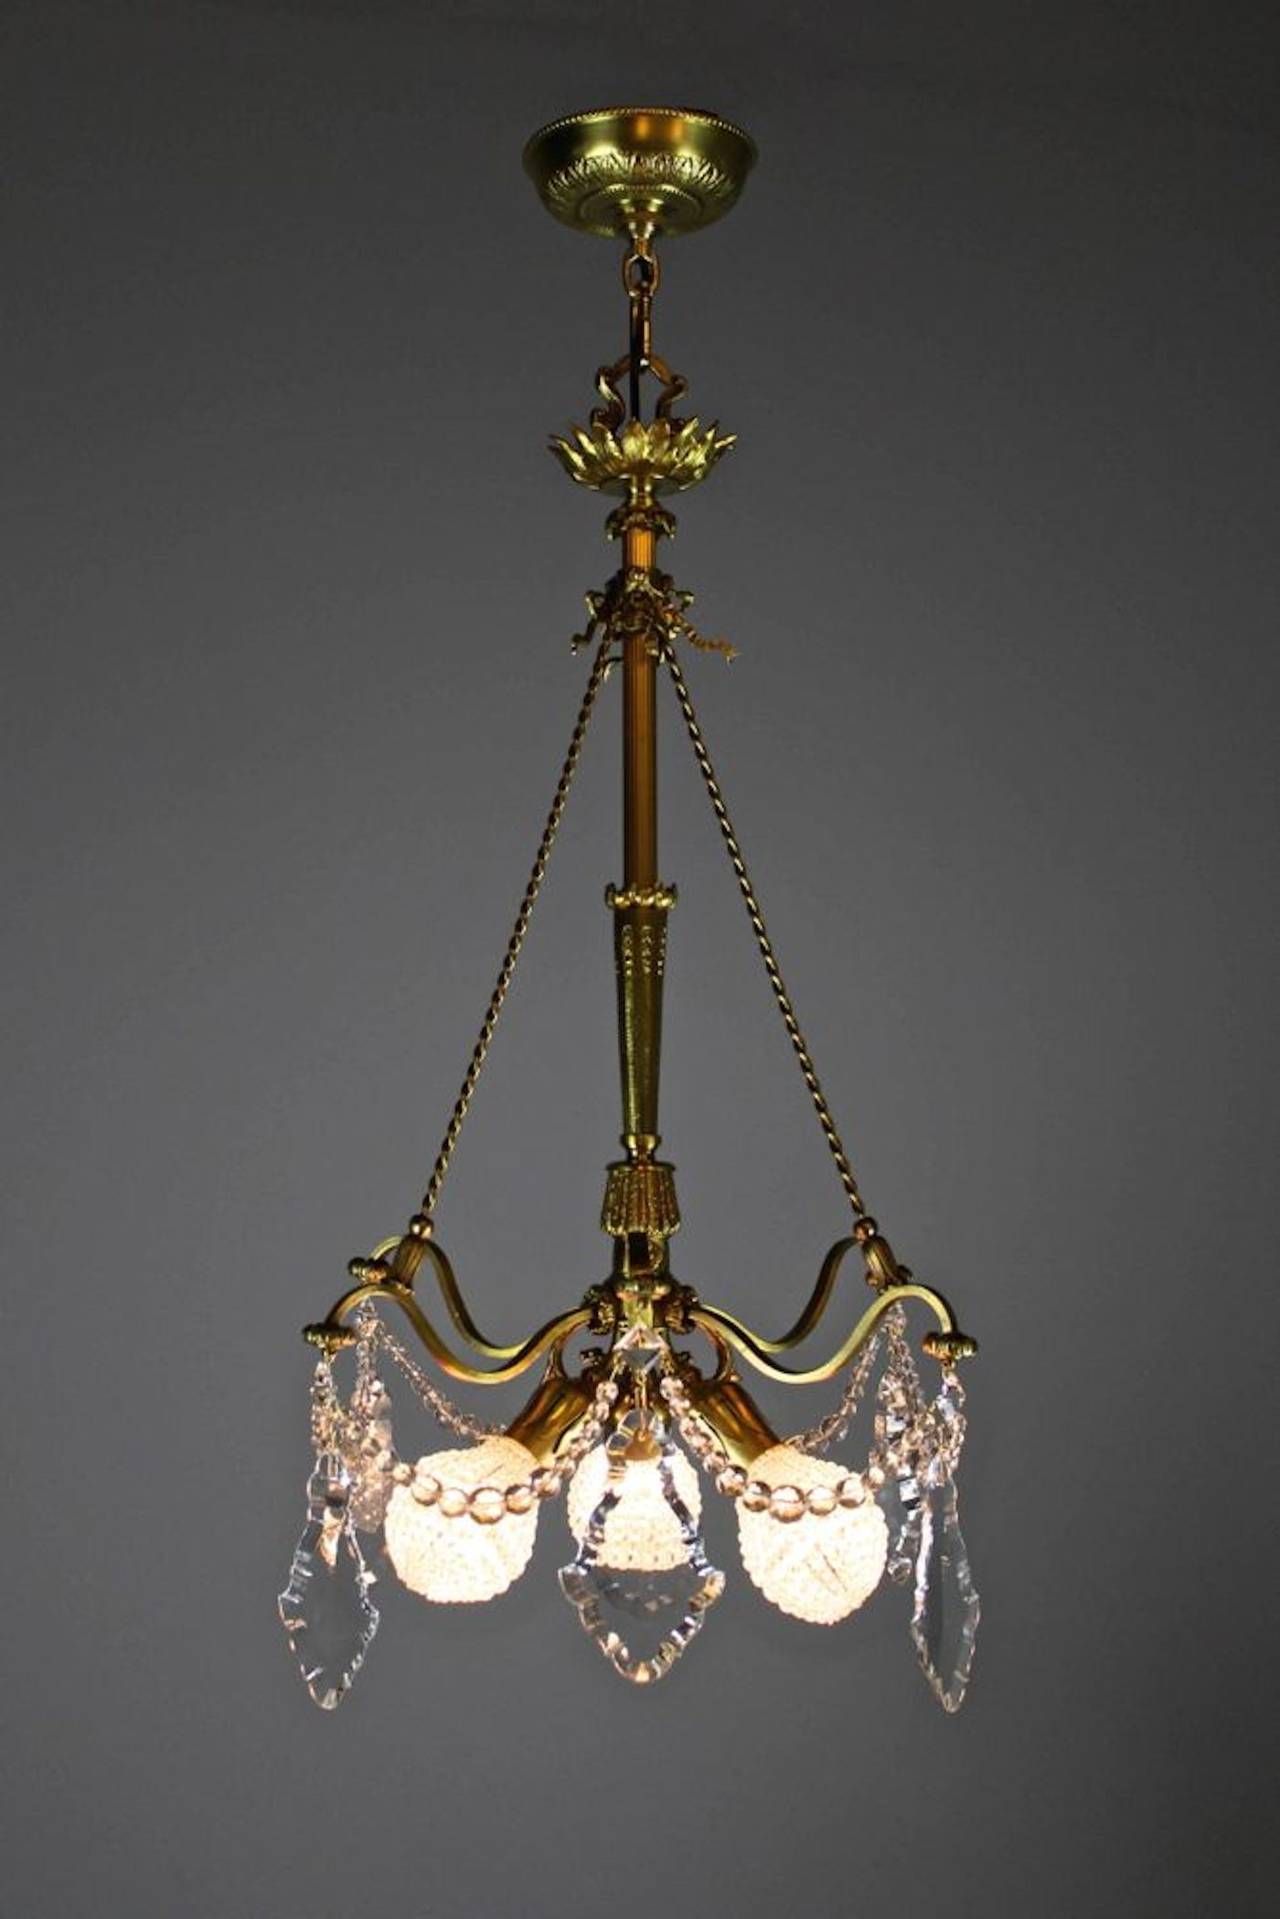 A super rare, elegant and dainty crystal basket chandelier attributed to Caldwell, circa 1905. This is an American made light done in a light-hearted decorative French style. Featuring delicate cut crystal  and cut crystal beading.
Measurements: